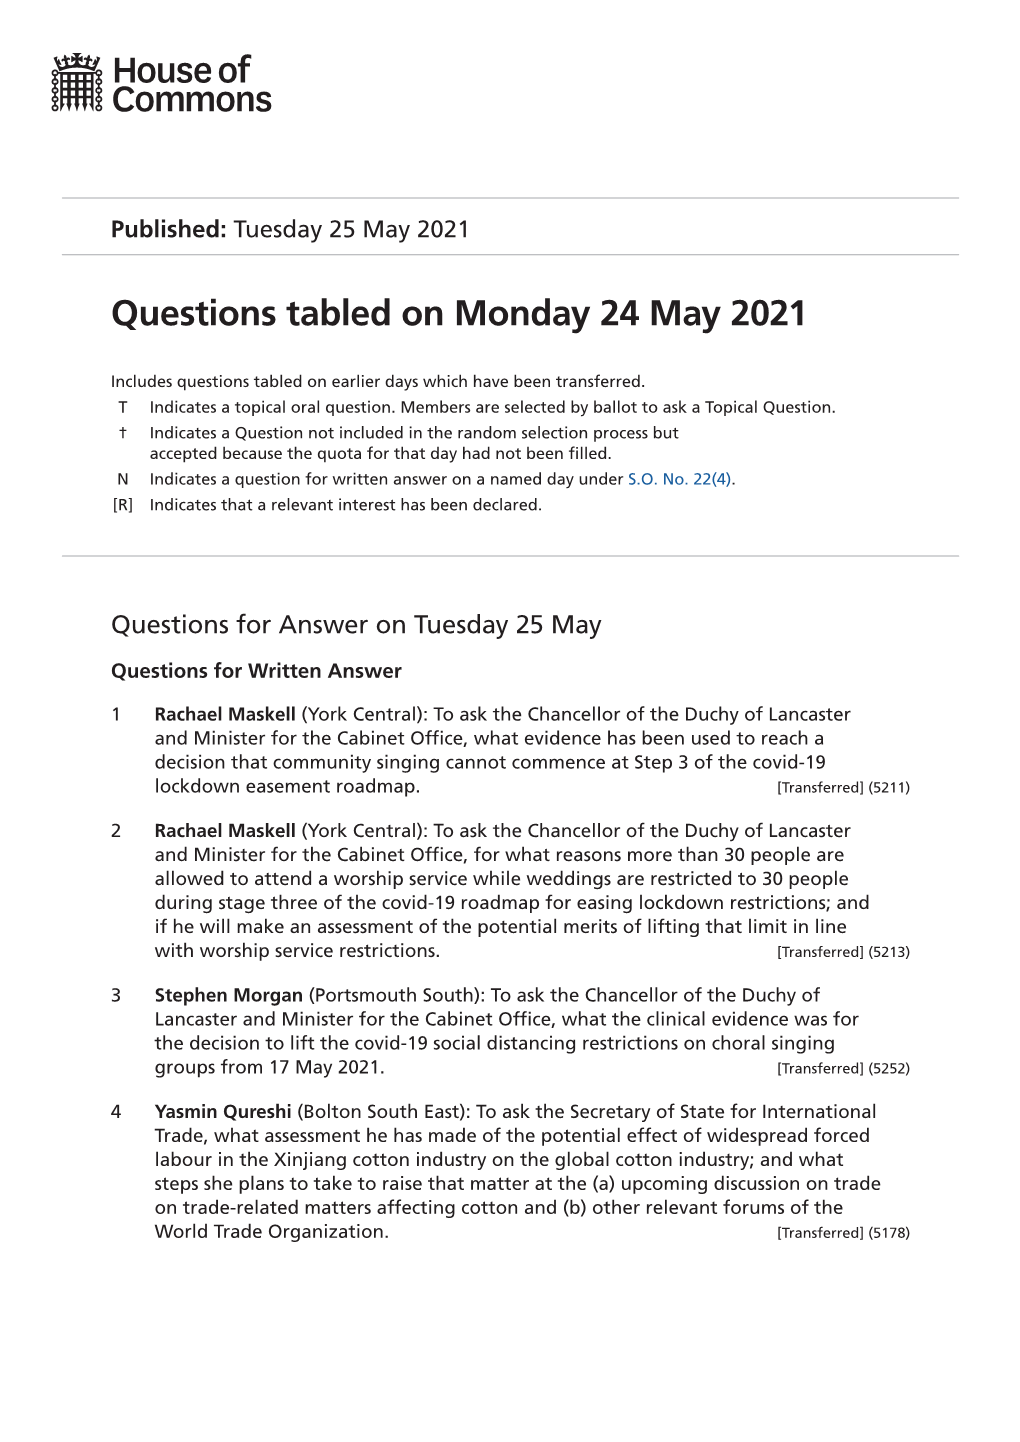 Questions Tabled on Monday 24 May 2021